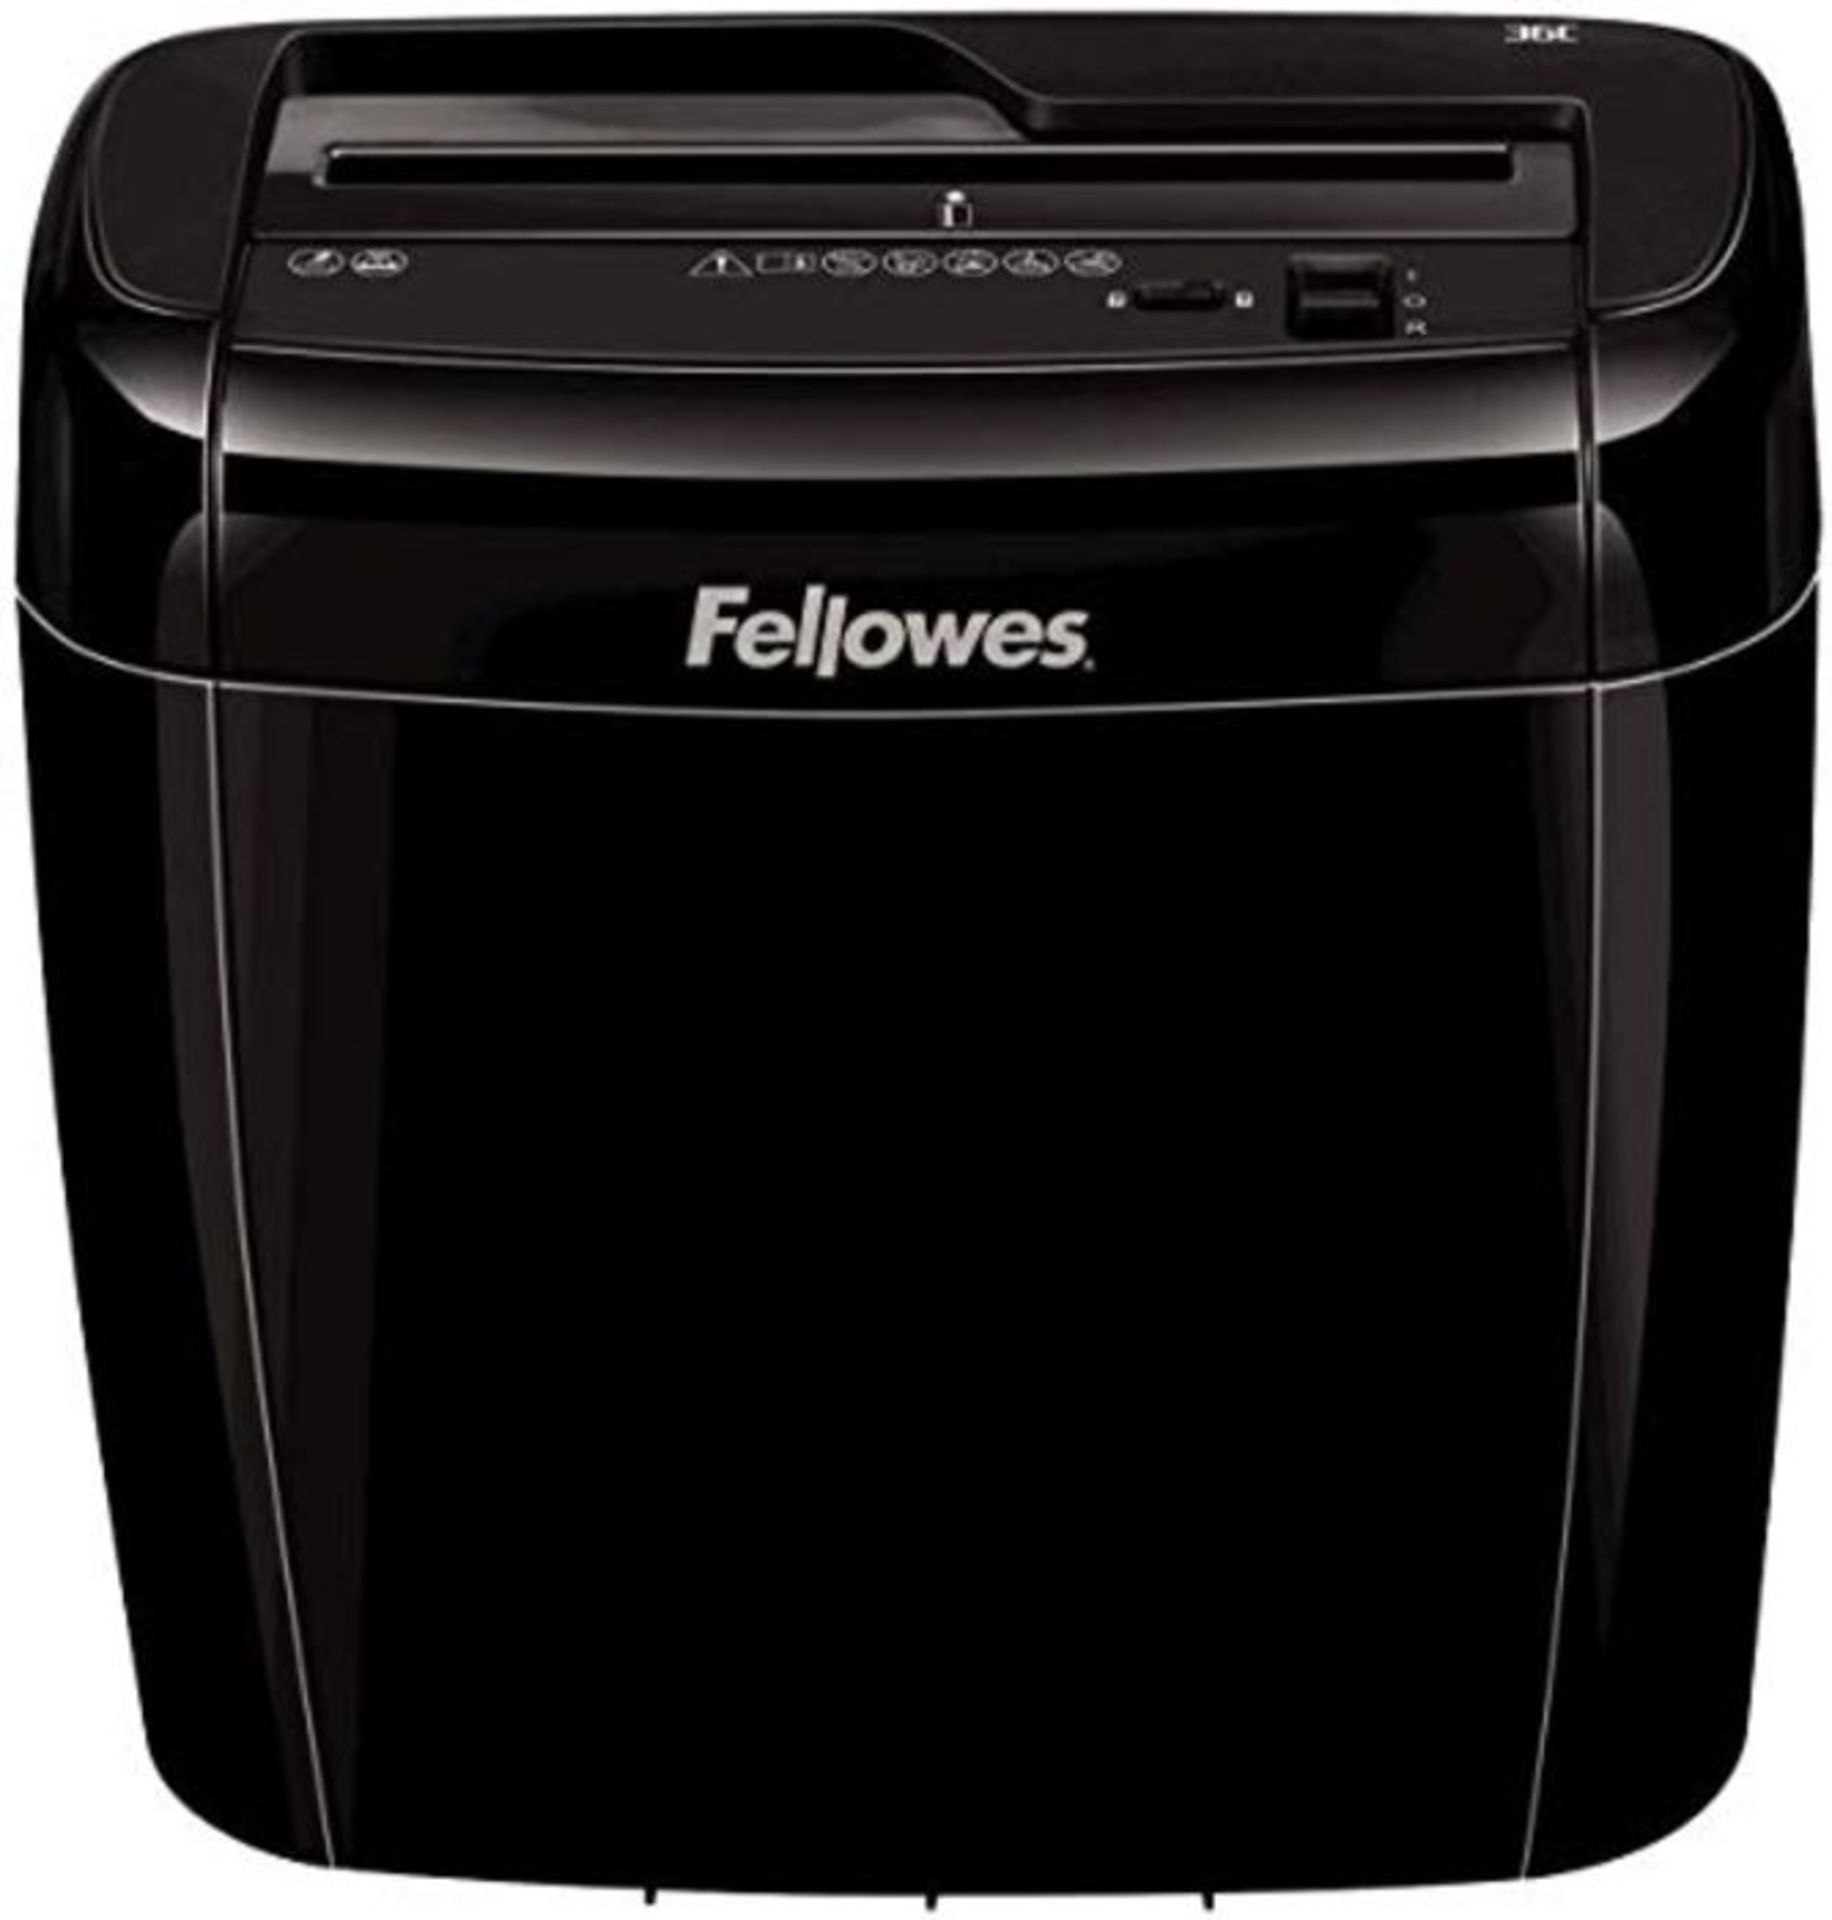 Fellowes Powershred 36C Cross Cut Personal Paper Shredder with Safety Lock for Home Us